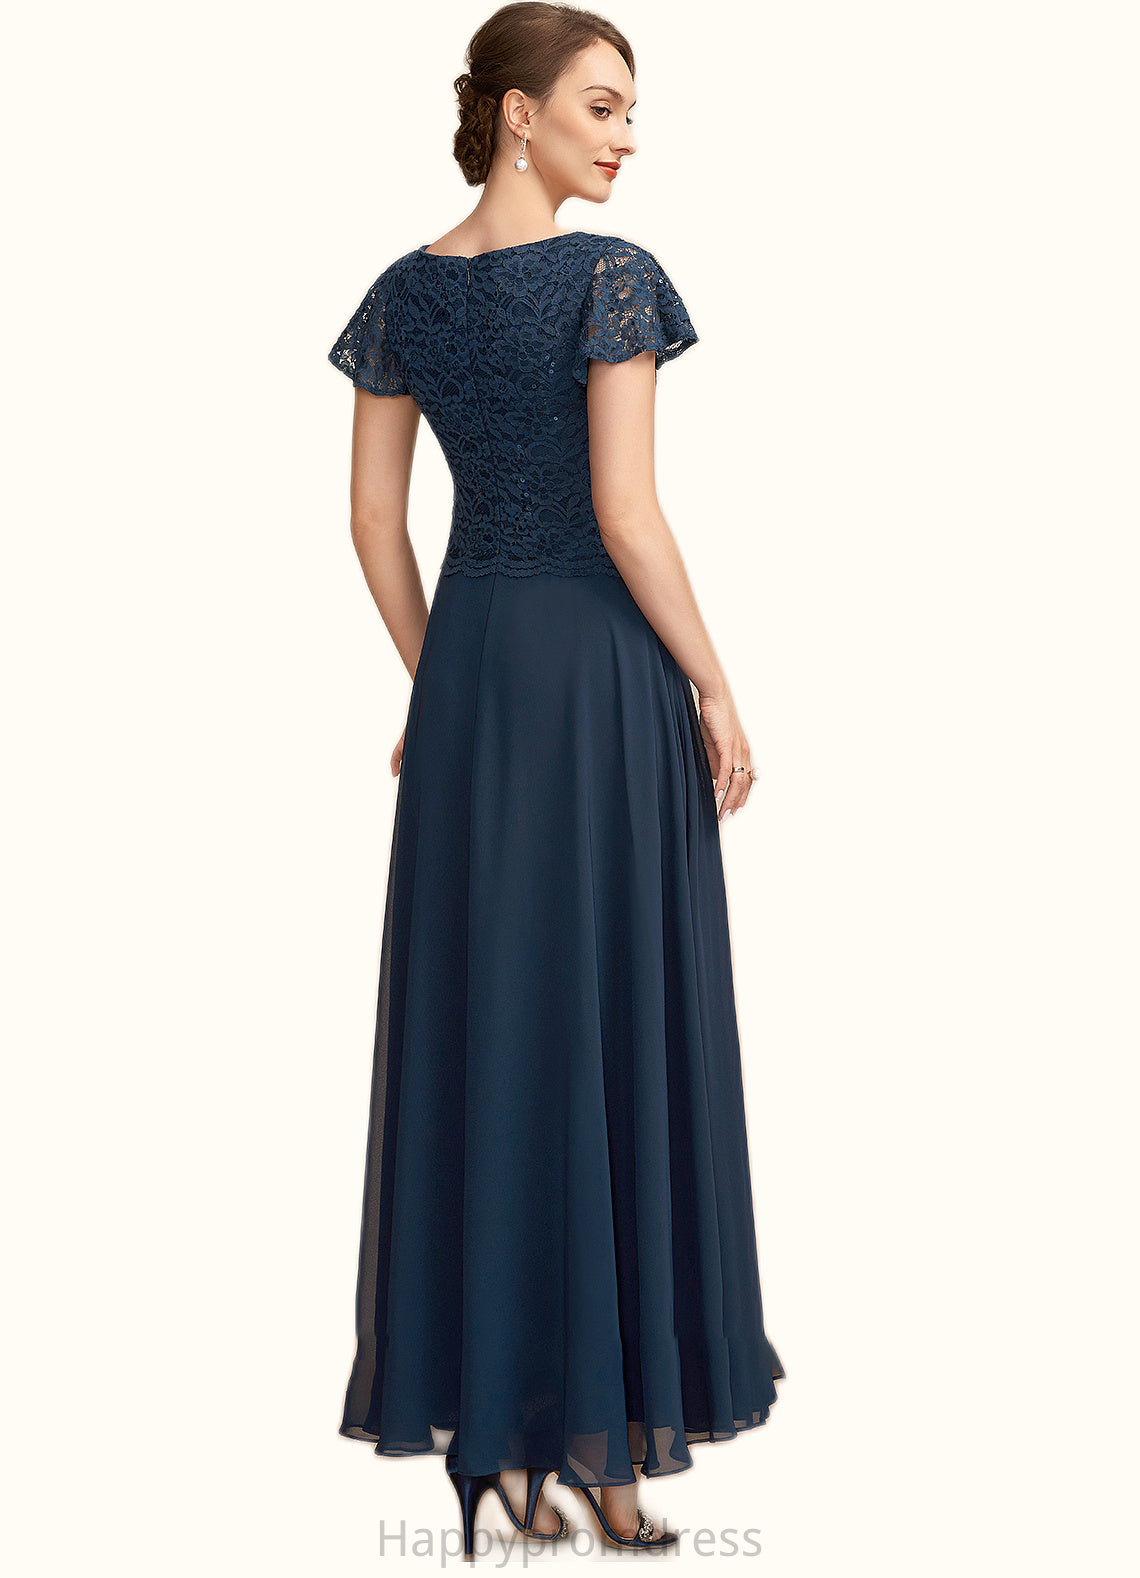 Maya A-Line Scoop Neck Ankle-Length Chiffon Lace Mother of the Bride Dress With Sequins XXS126P0014701